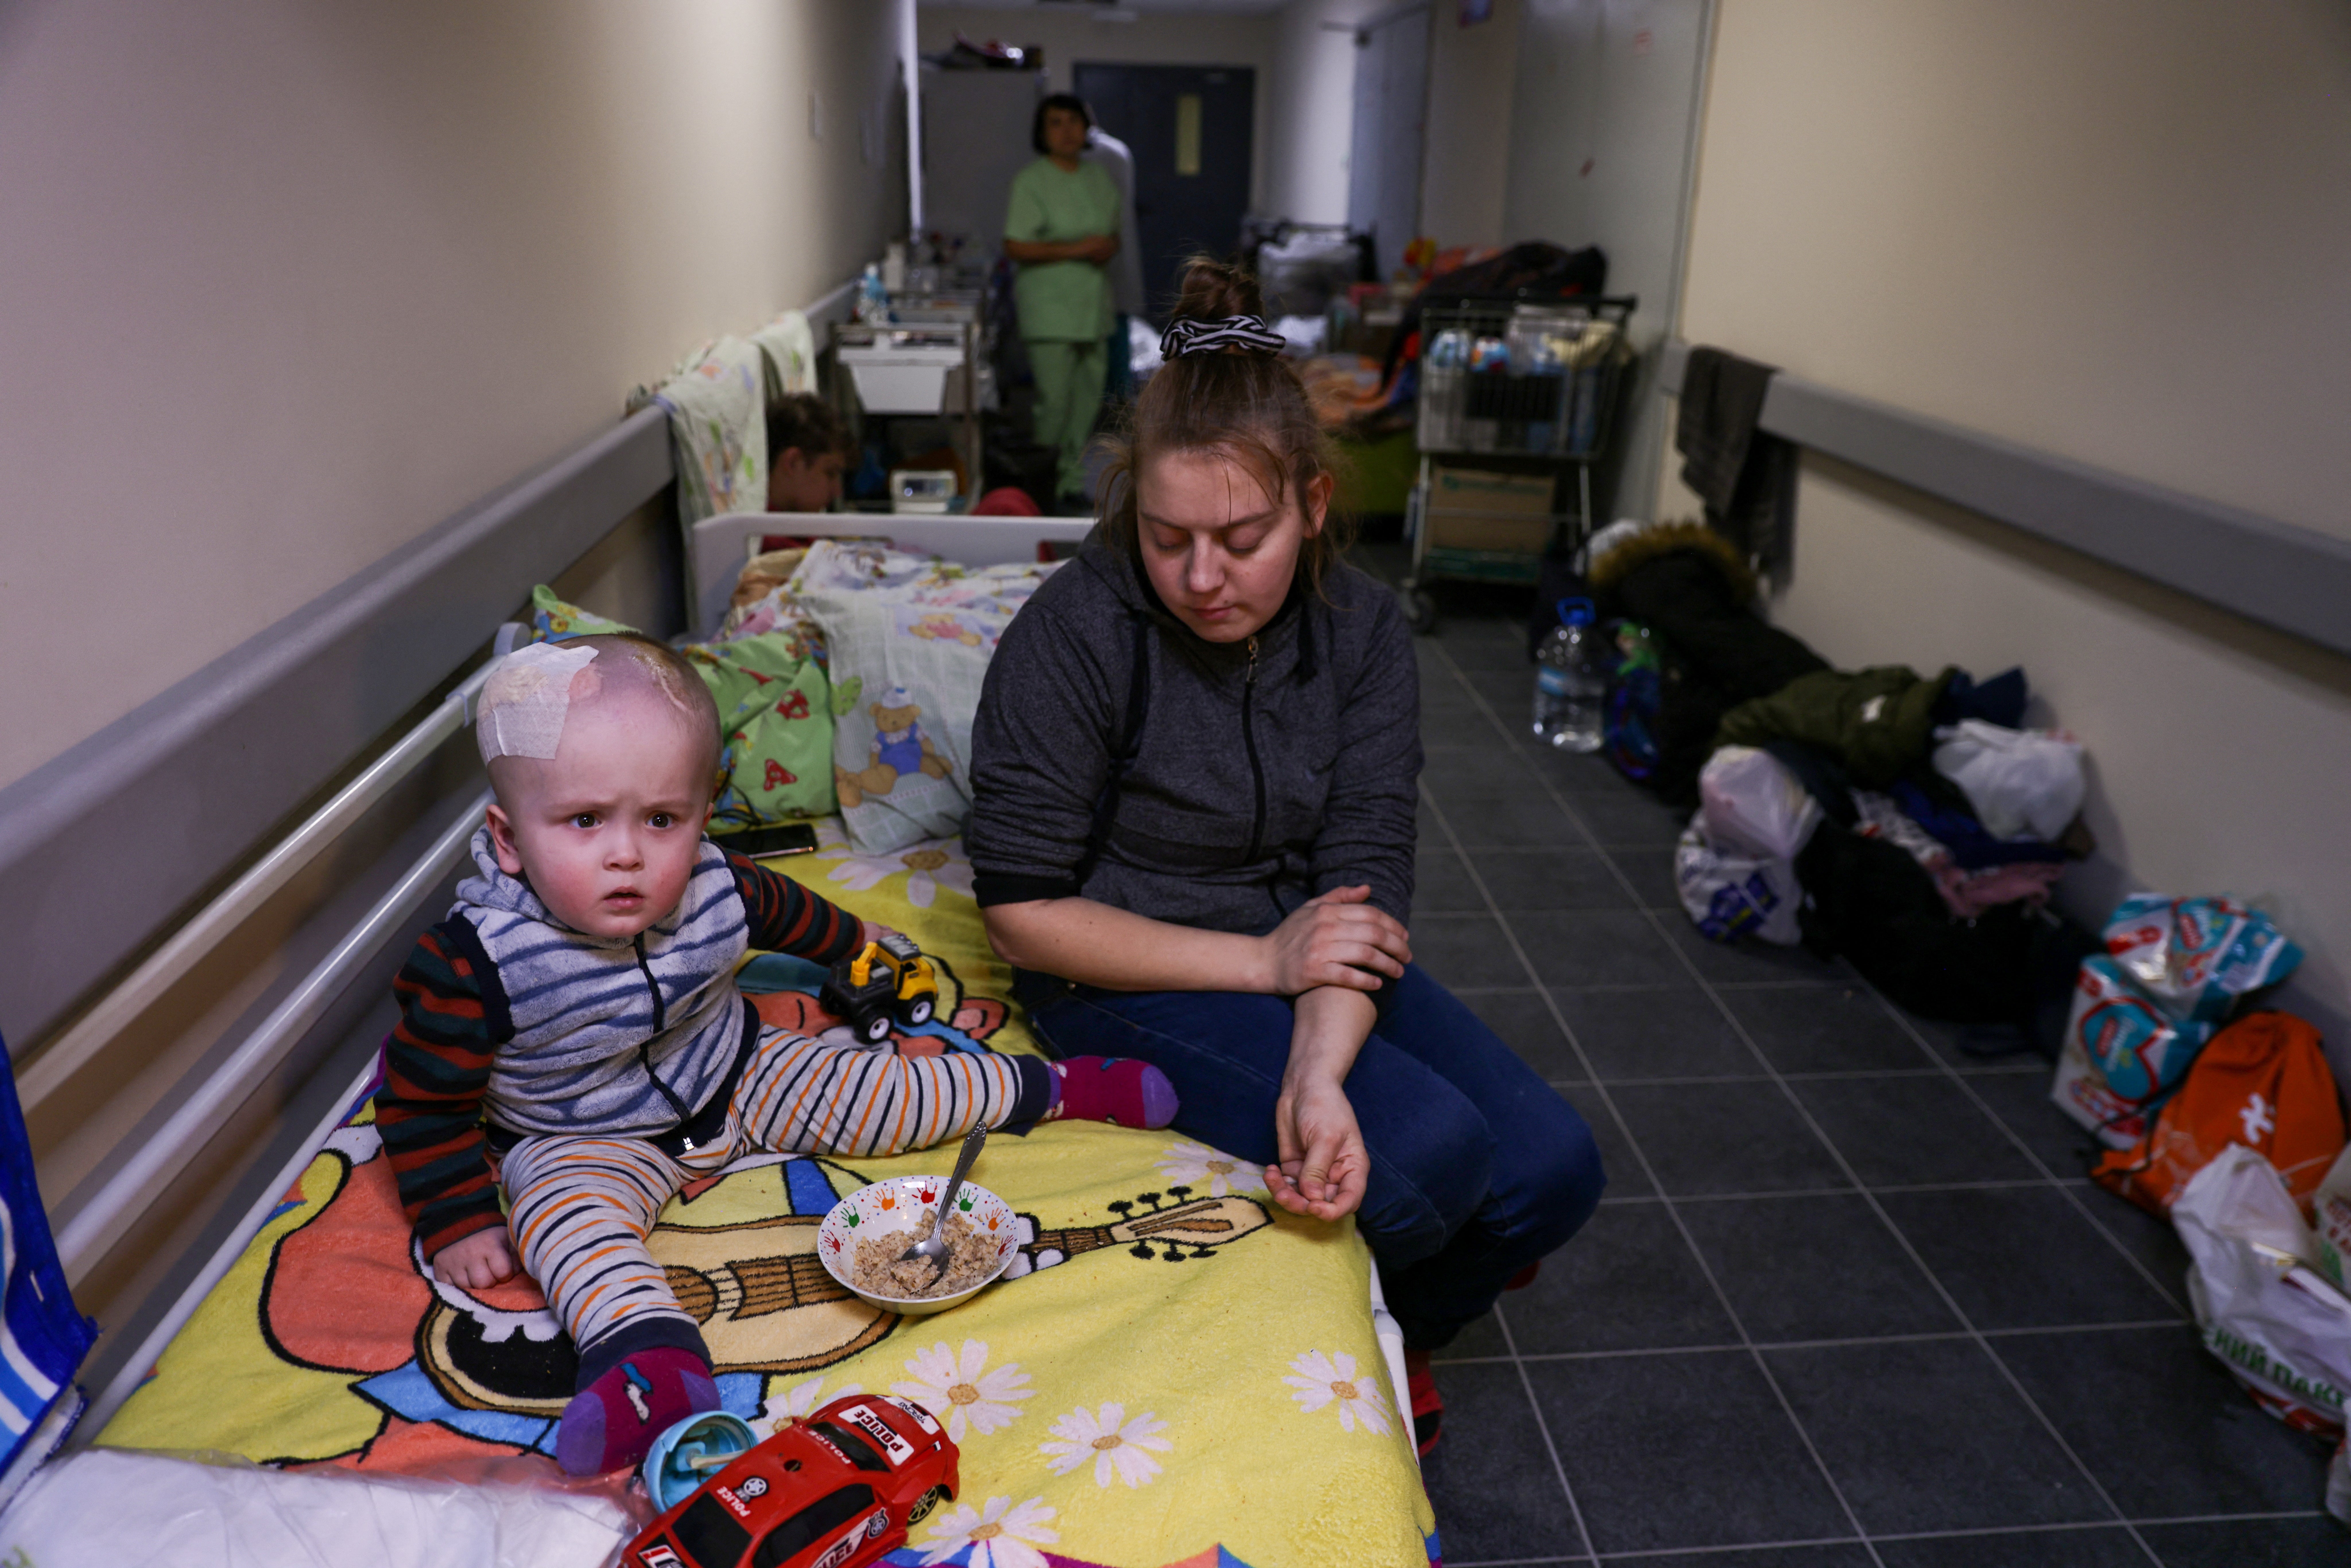 A woman sits next to a child patient whose treatments is underway, in the hallways of basement floors of Okhmadet Children's Hospital, as Russia's invasion of Ukraine continues